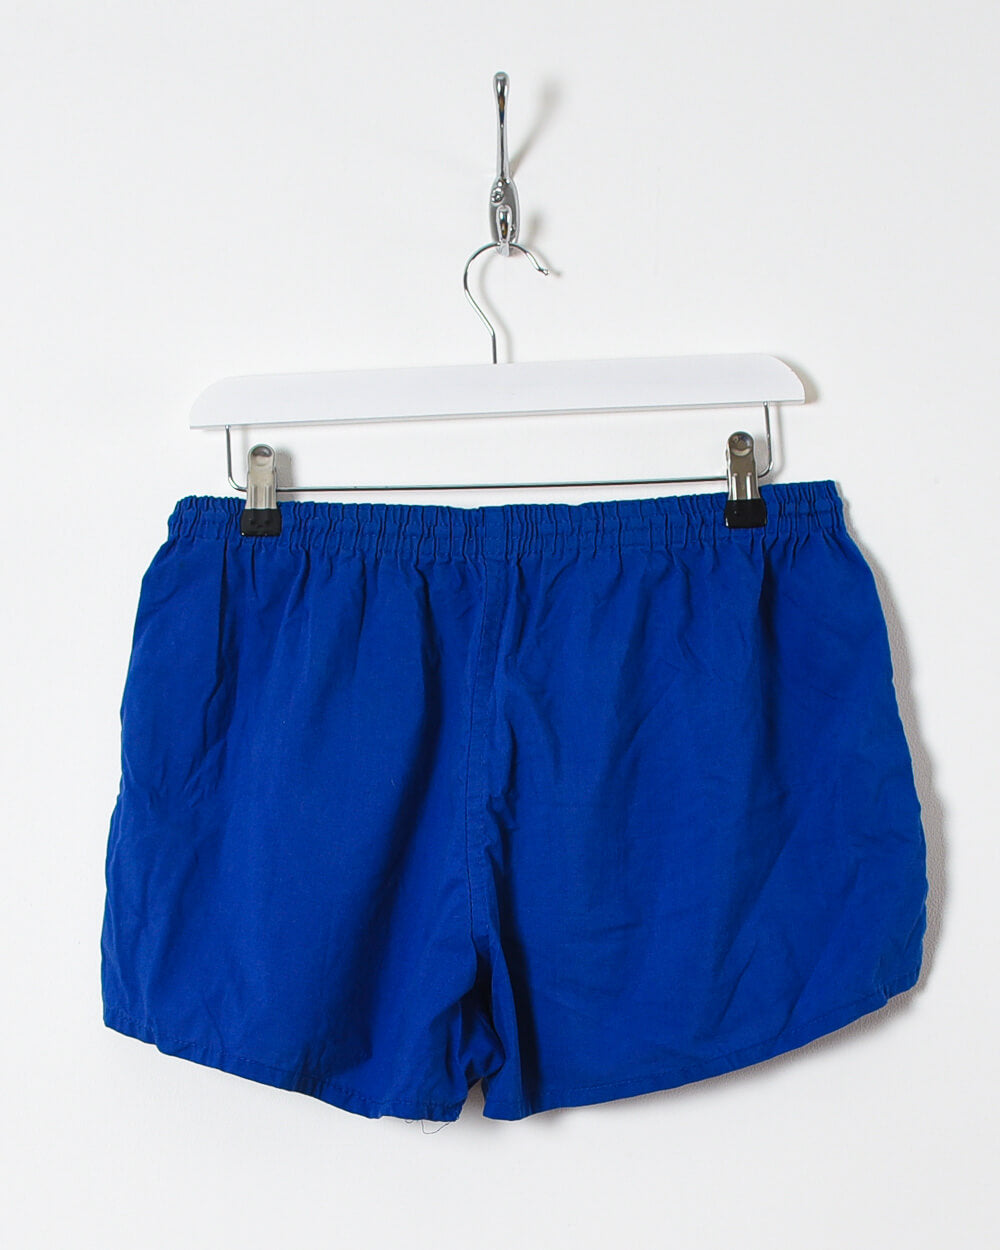 Champion Shorts - W28 - Domno Vintage 90s, 80s, 00s Retro and Vintage Clothing 